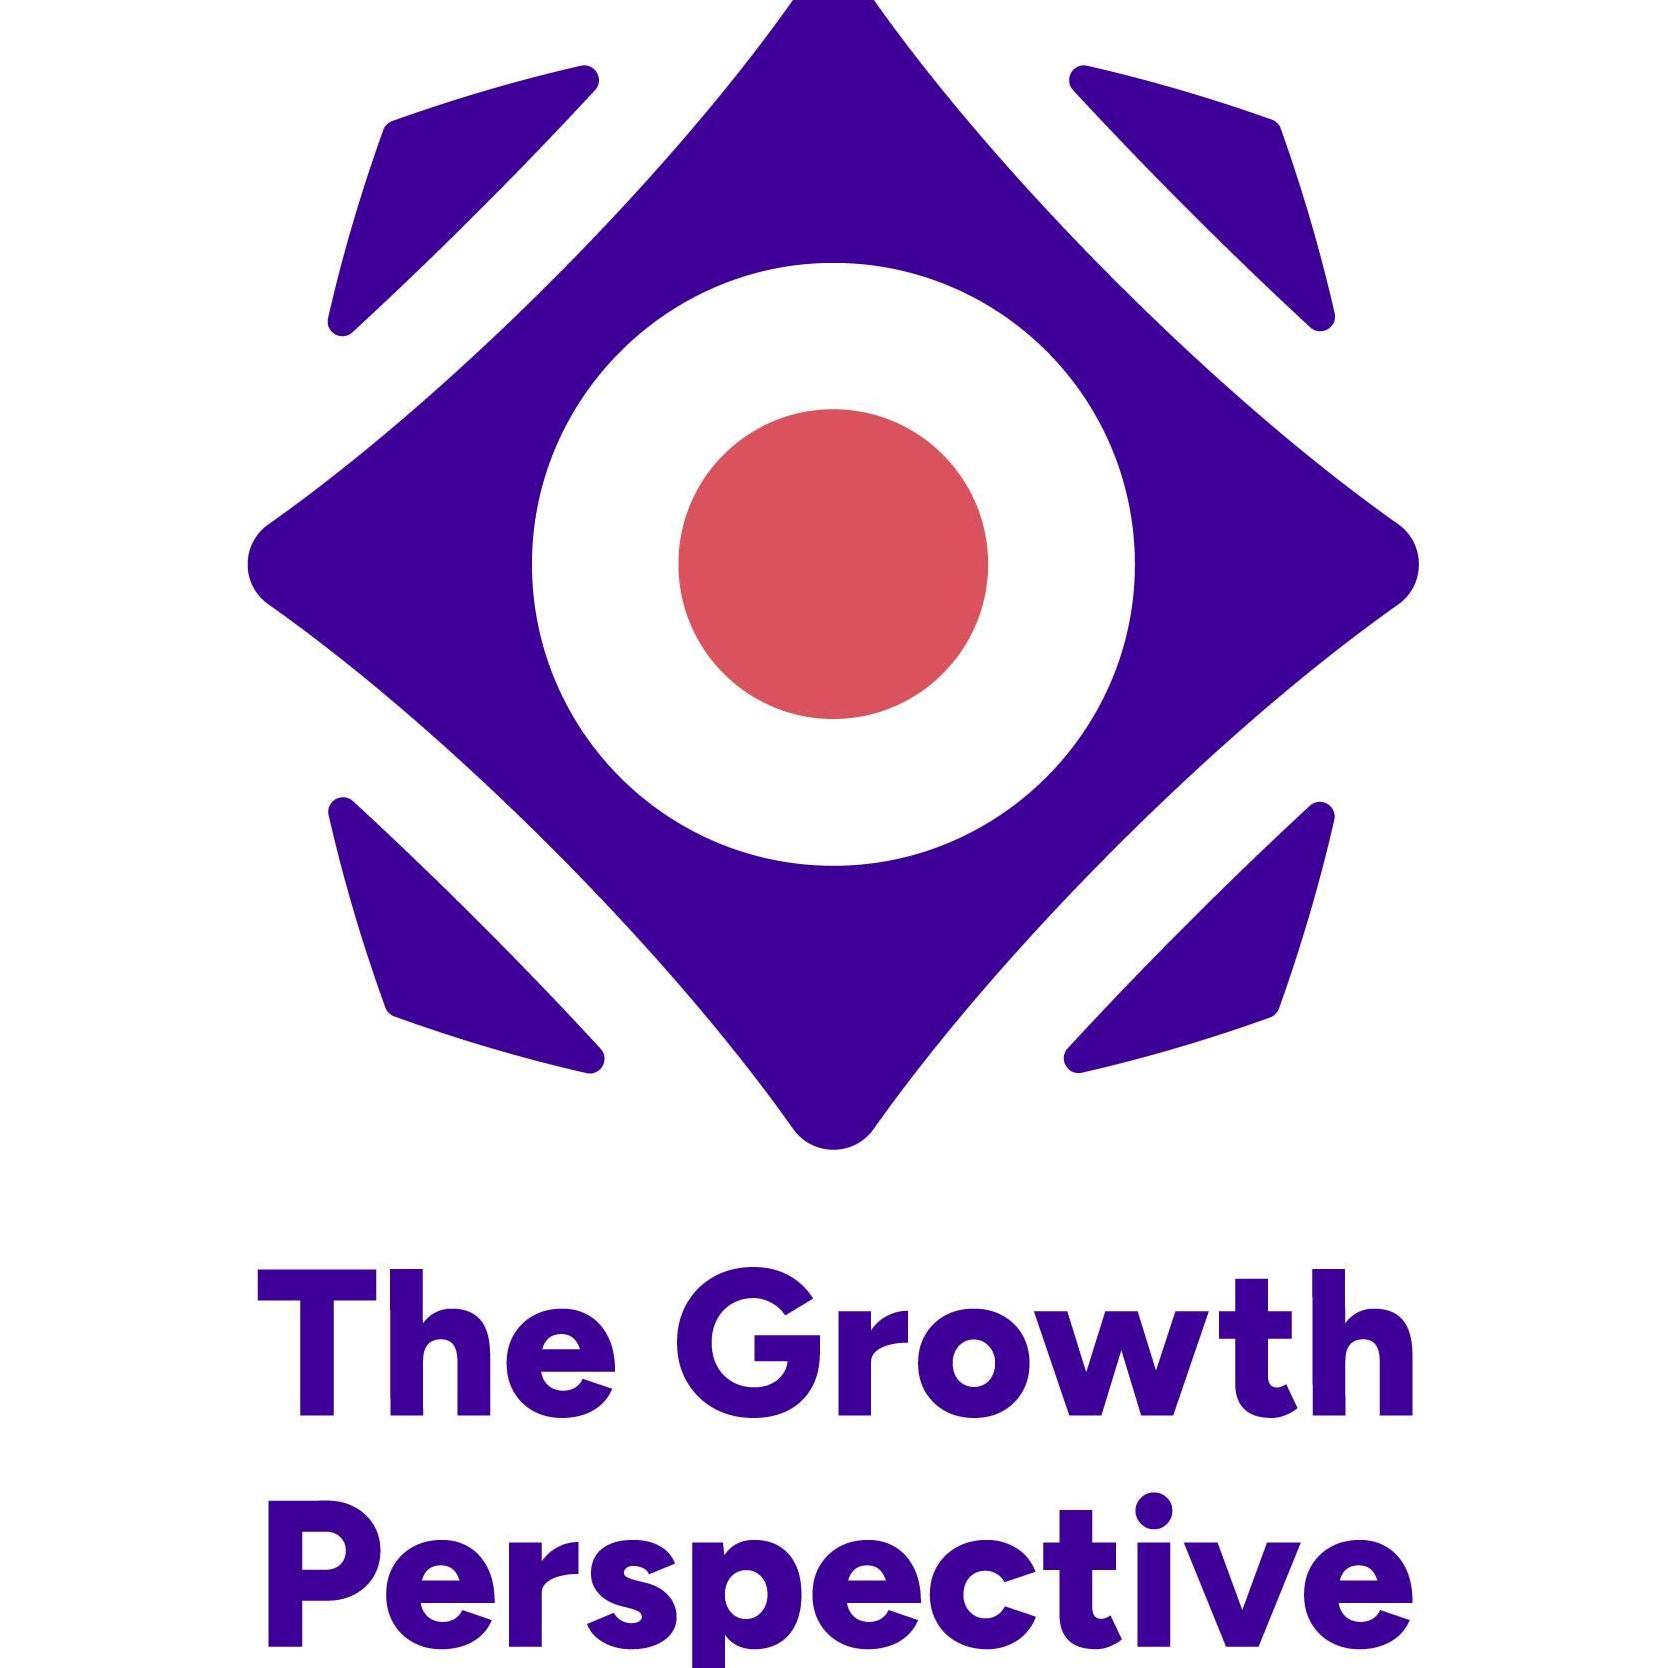 Thegrowth Perspective